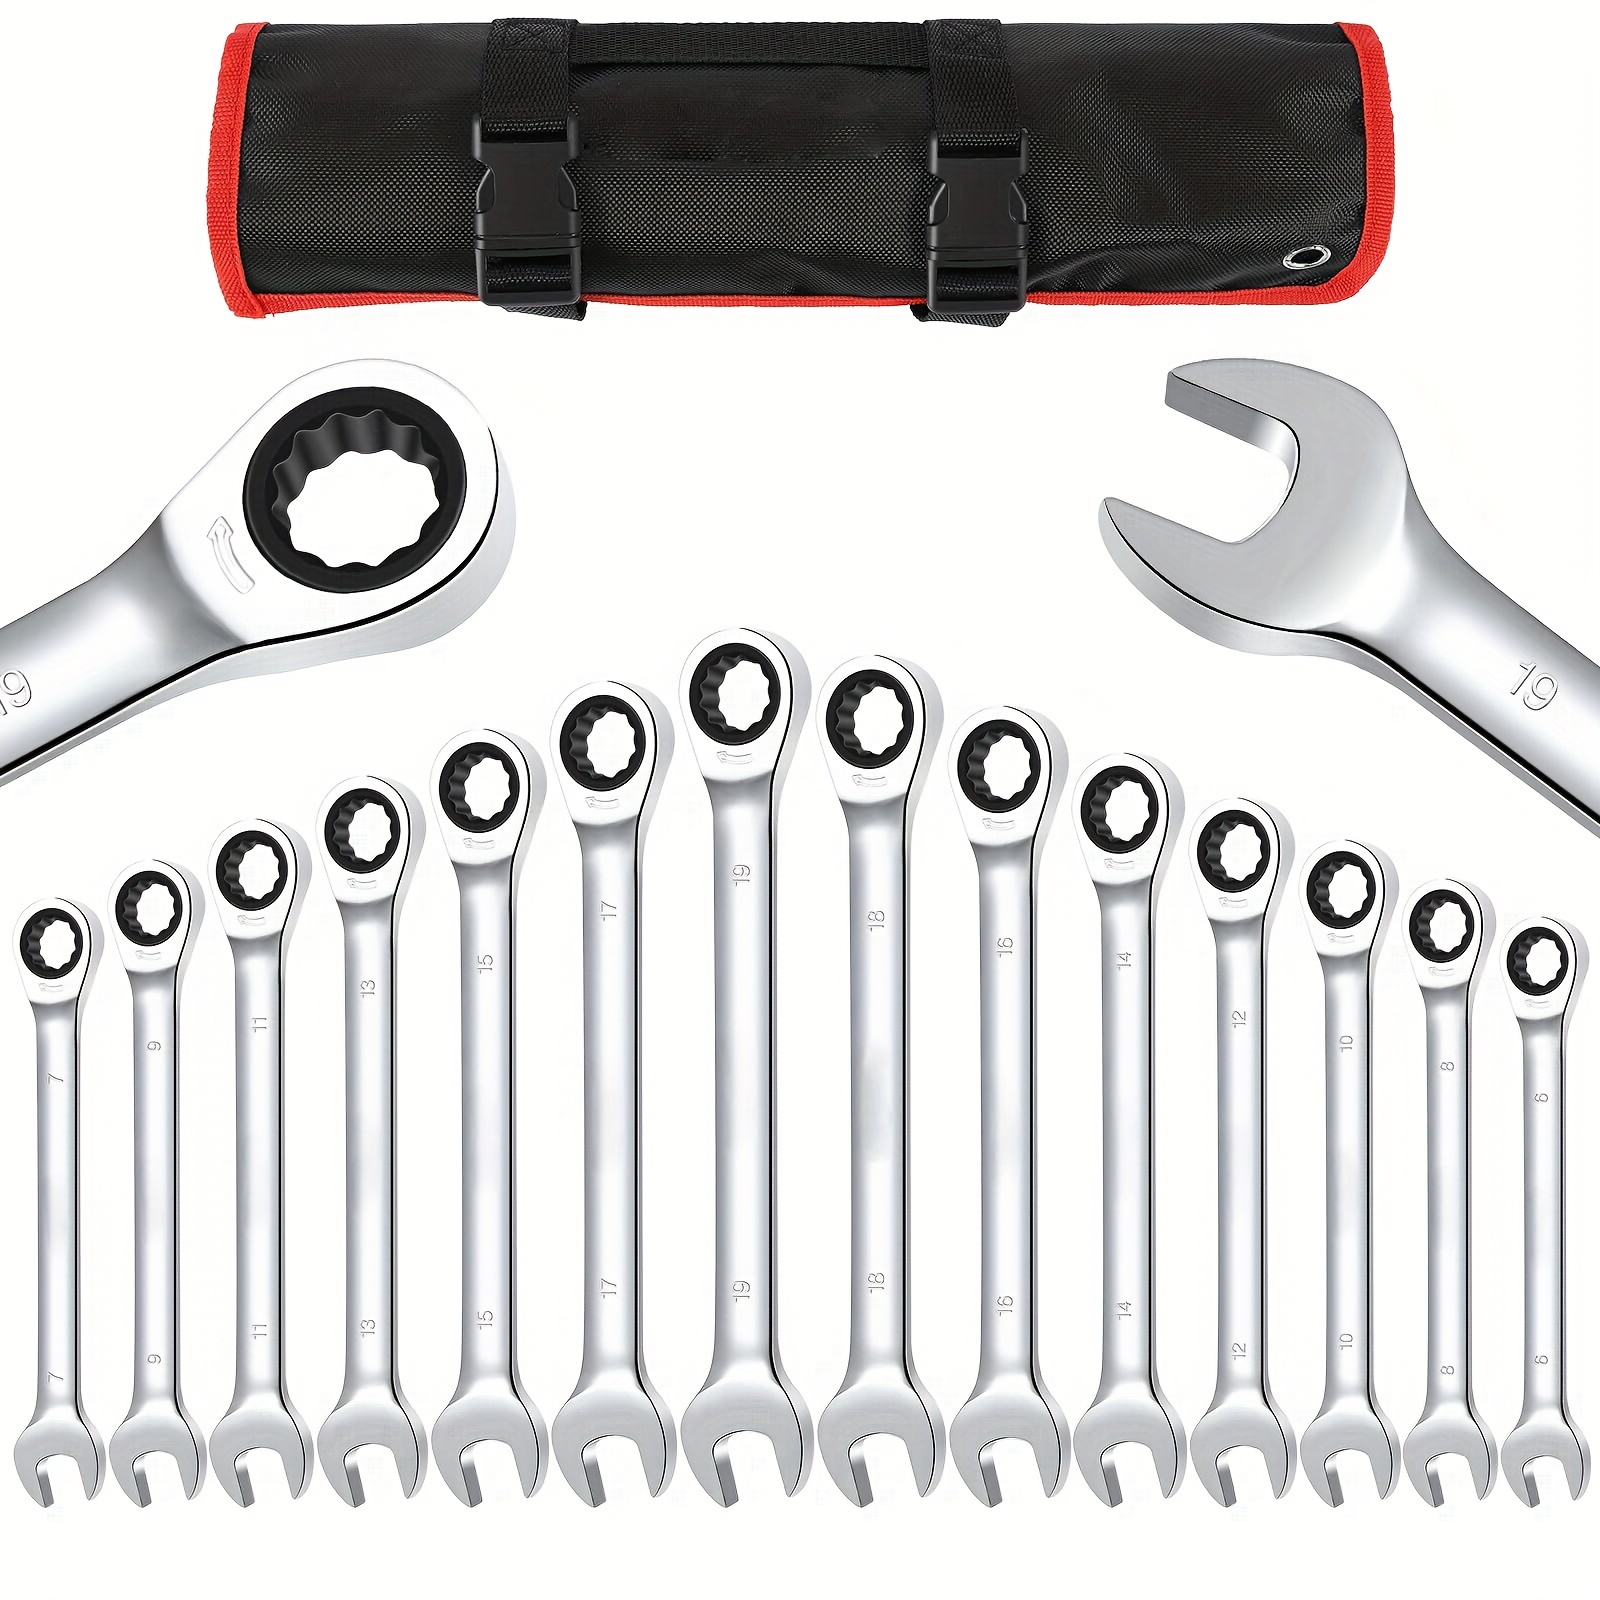 

14 Pieces Wrench Set, Fix-head Ratcheting Combination Set, Metric 6-19mm, 72-teeth, Cr-v Steel Ratchet Wrenches Set With Storage Bag For Truck Garage Projects